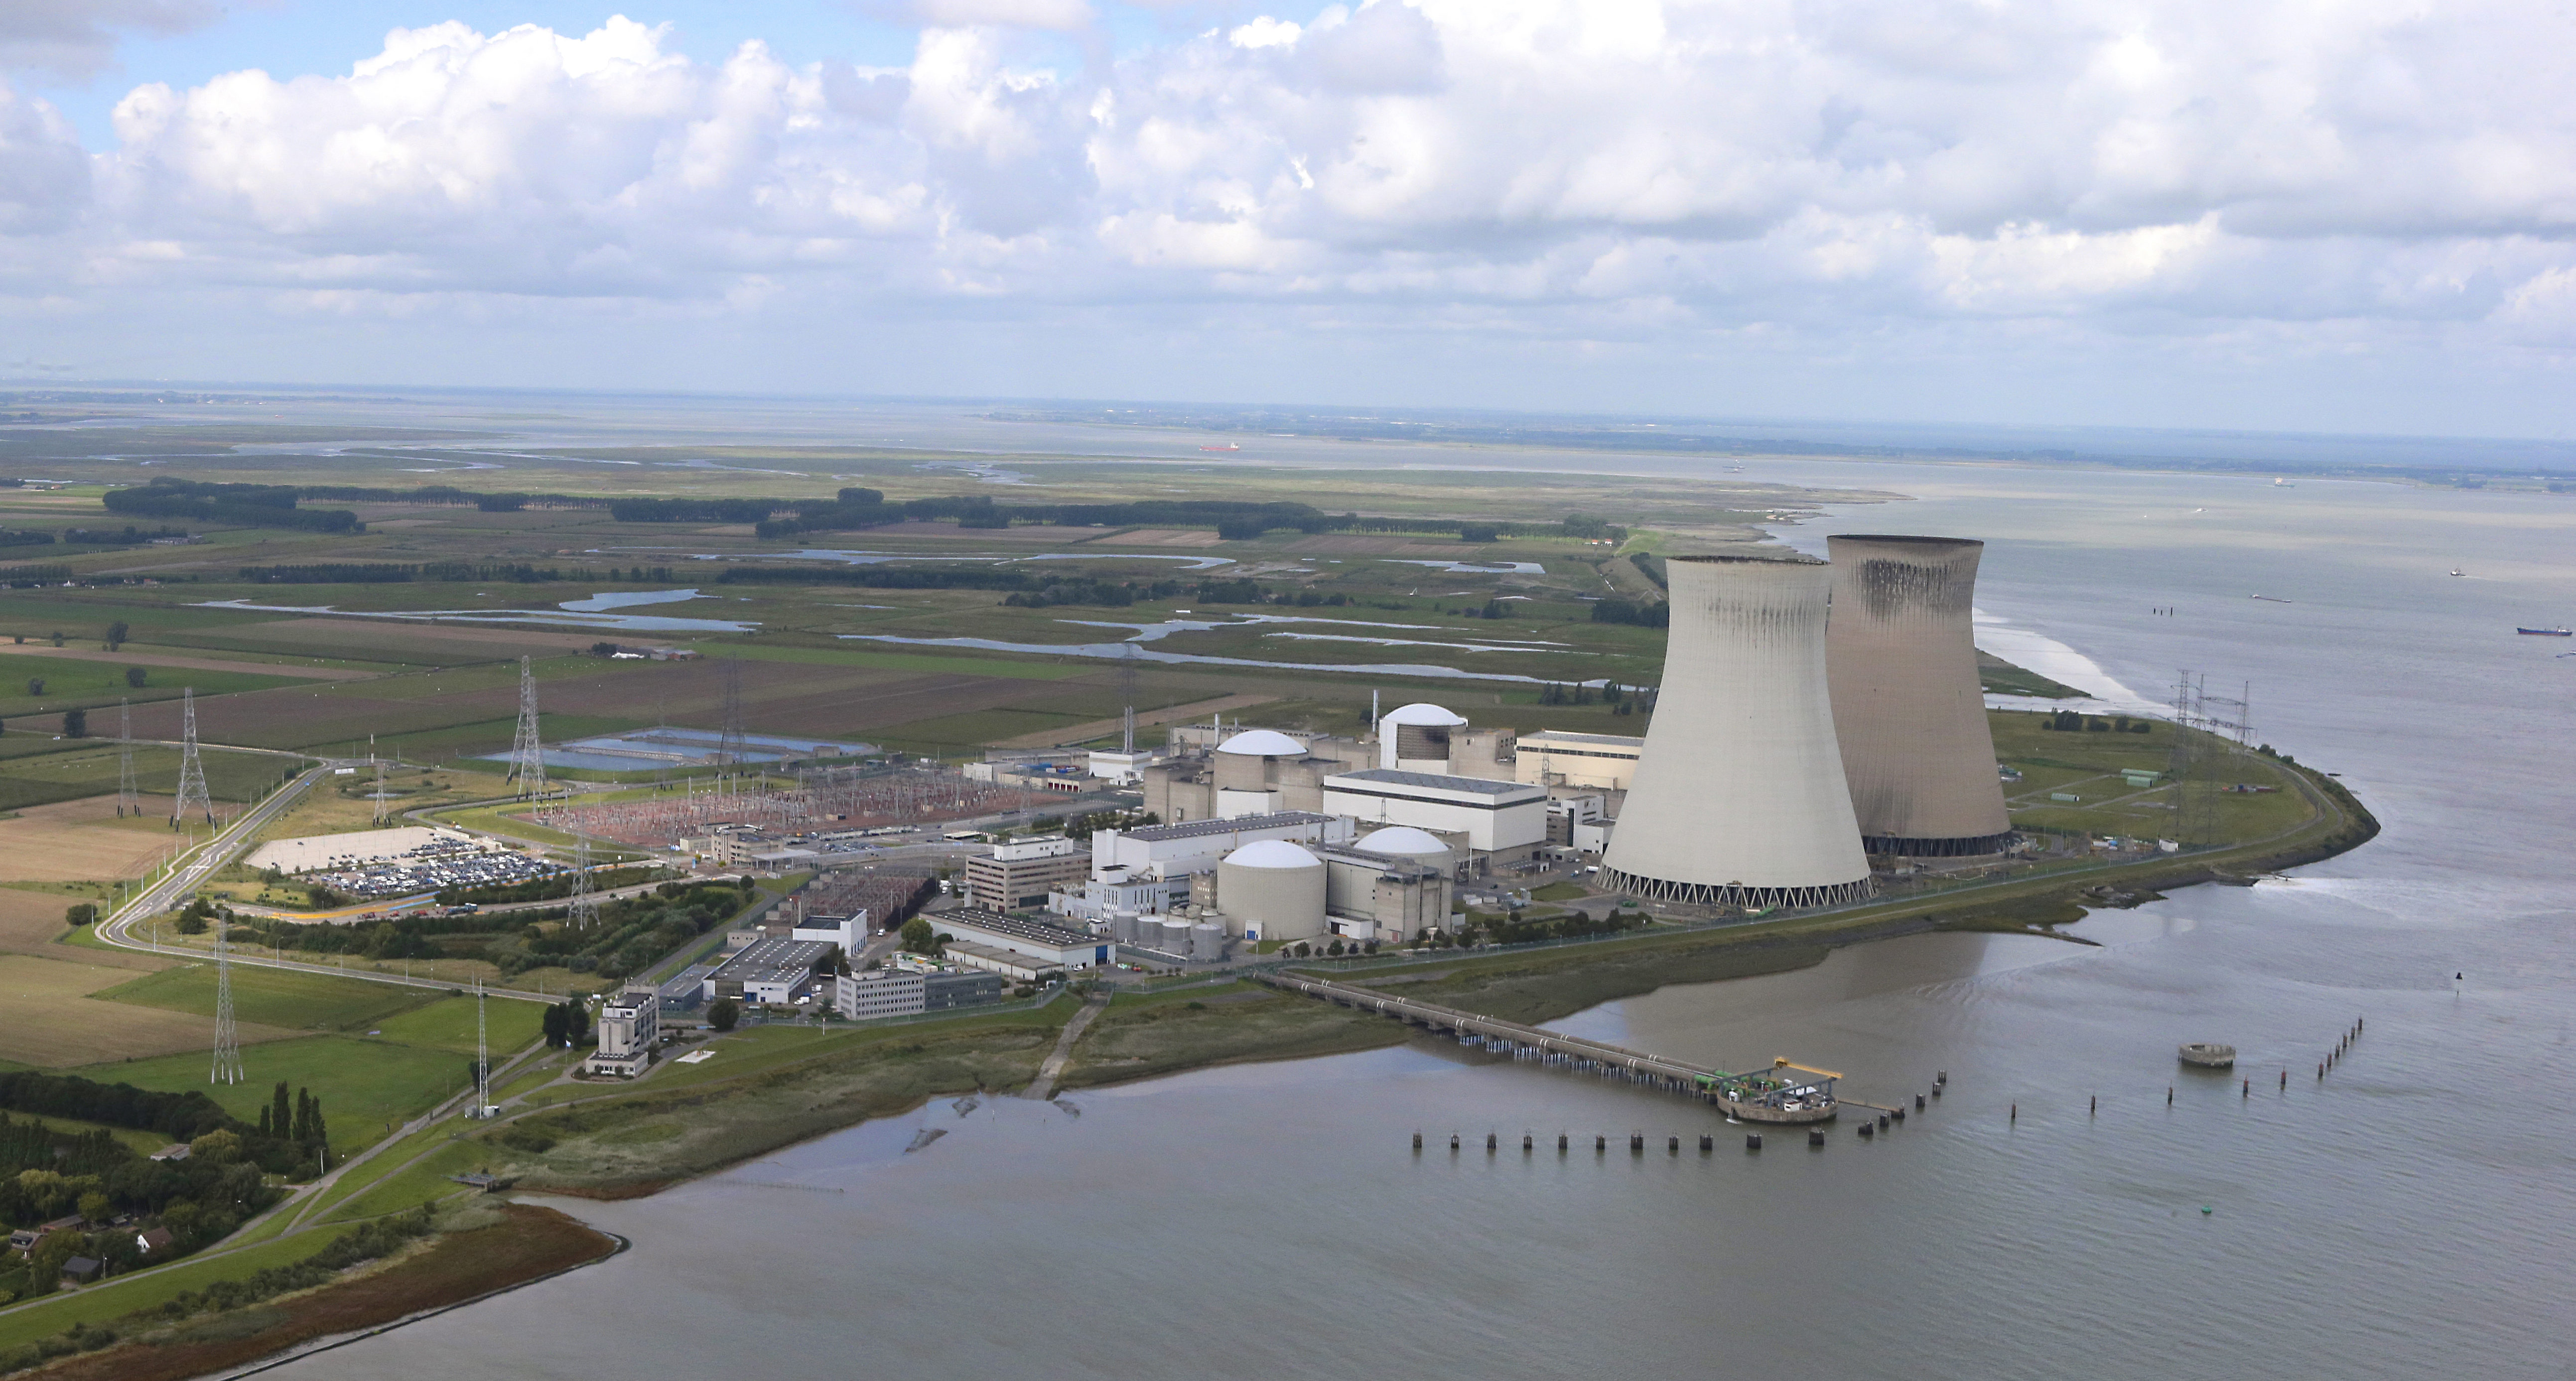 Engie exerts pressure to keep two nuclear reactors until 2045